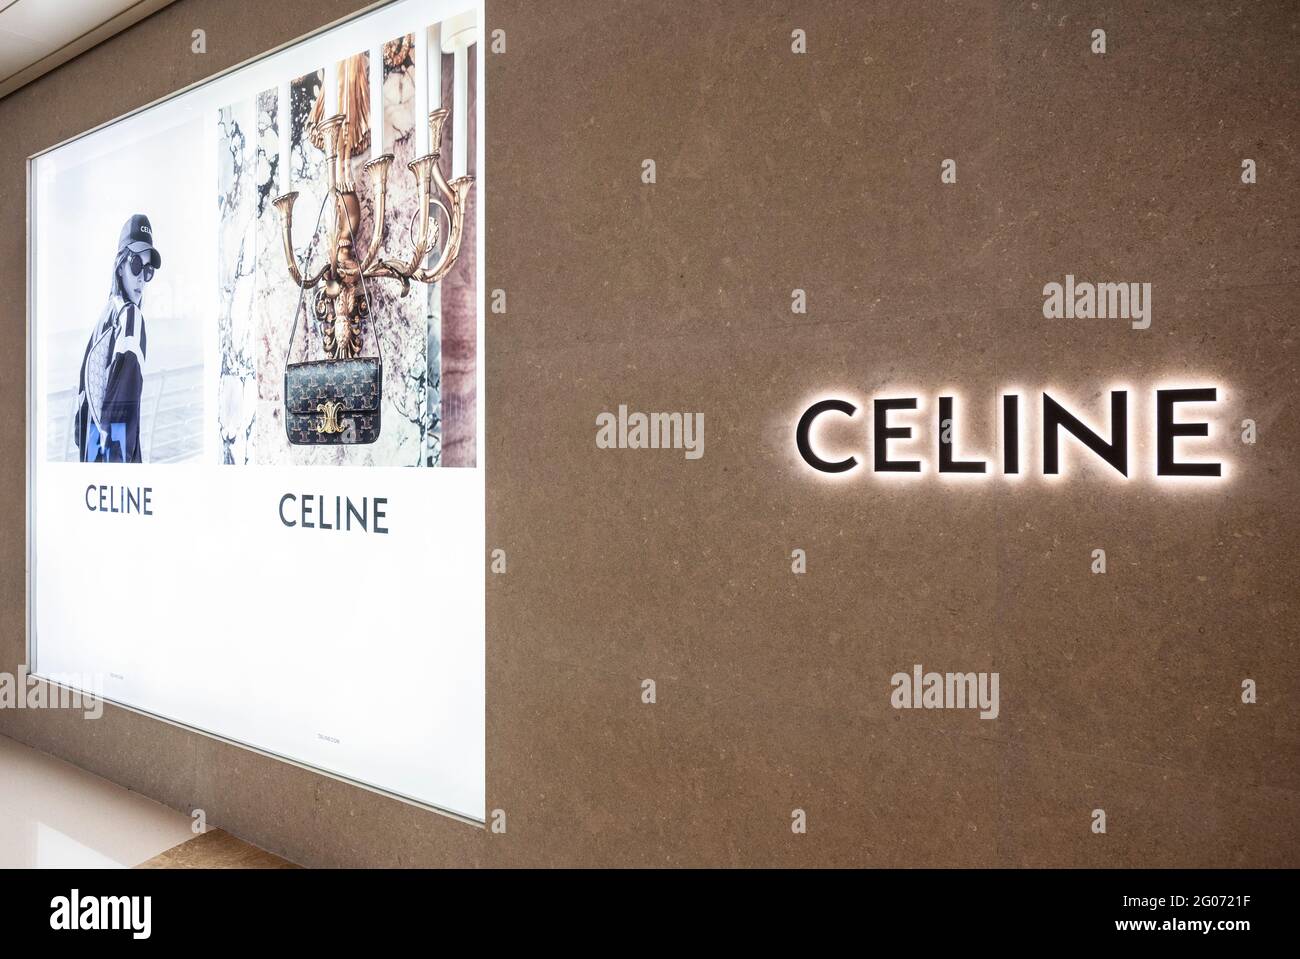 French luxury goods brand Celine, owned by LVMH group, logo seen in  Photo d'actualité - Getty Images